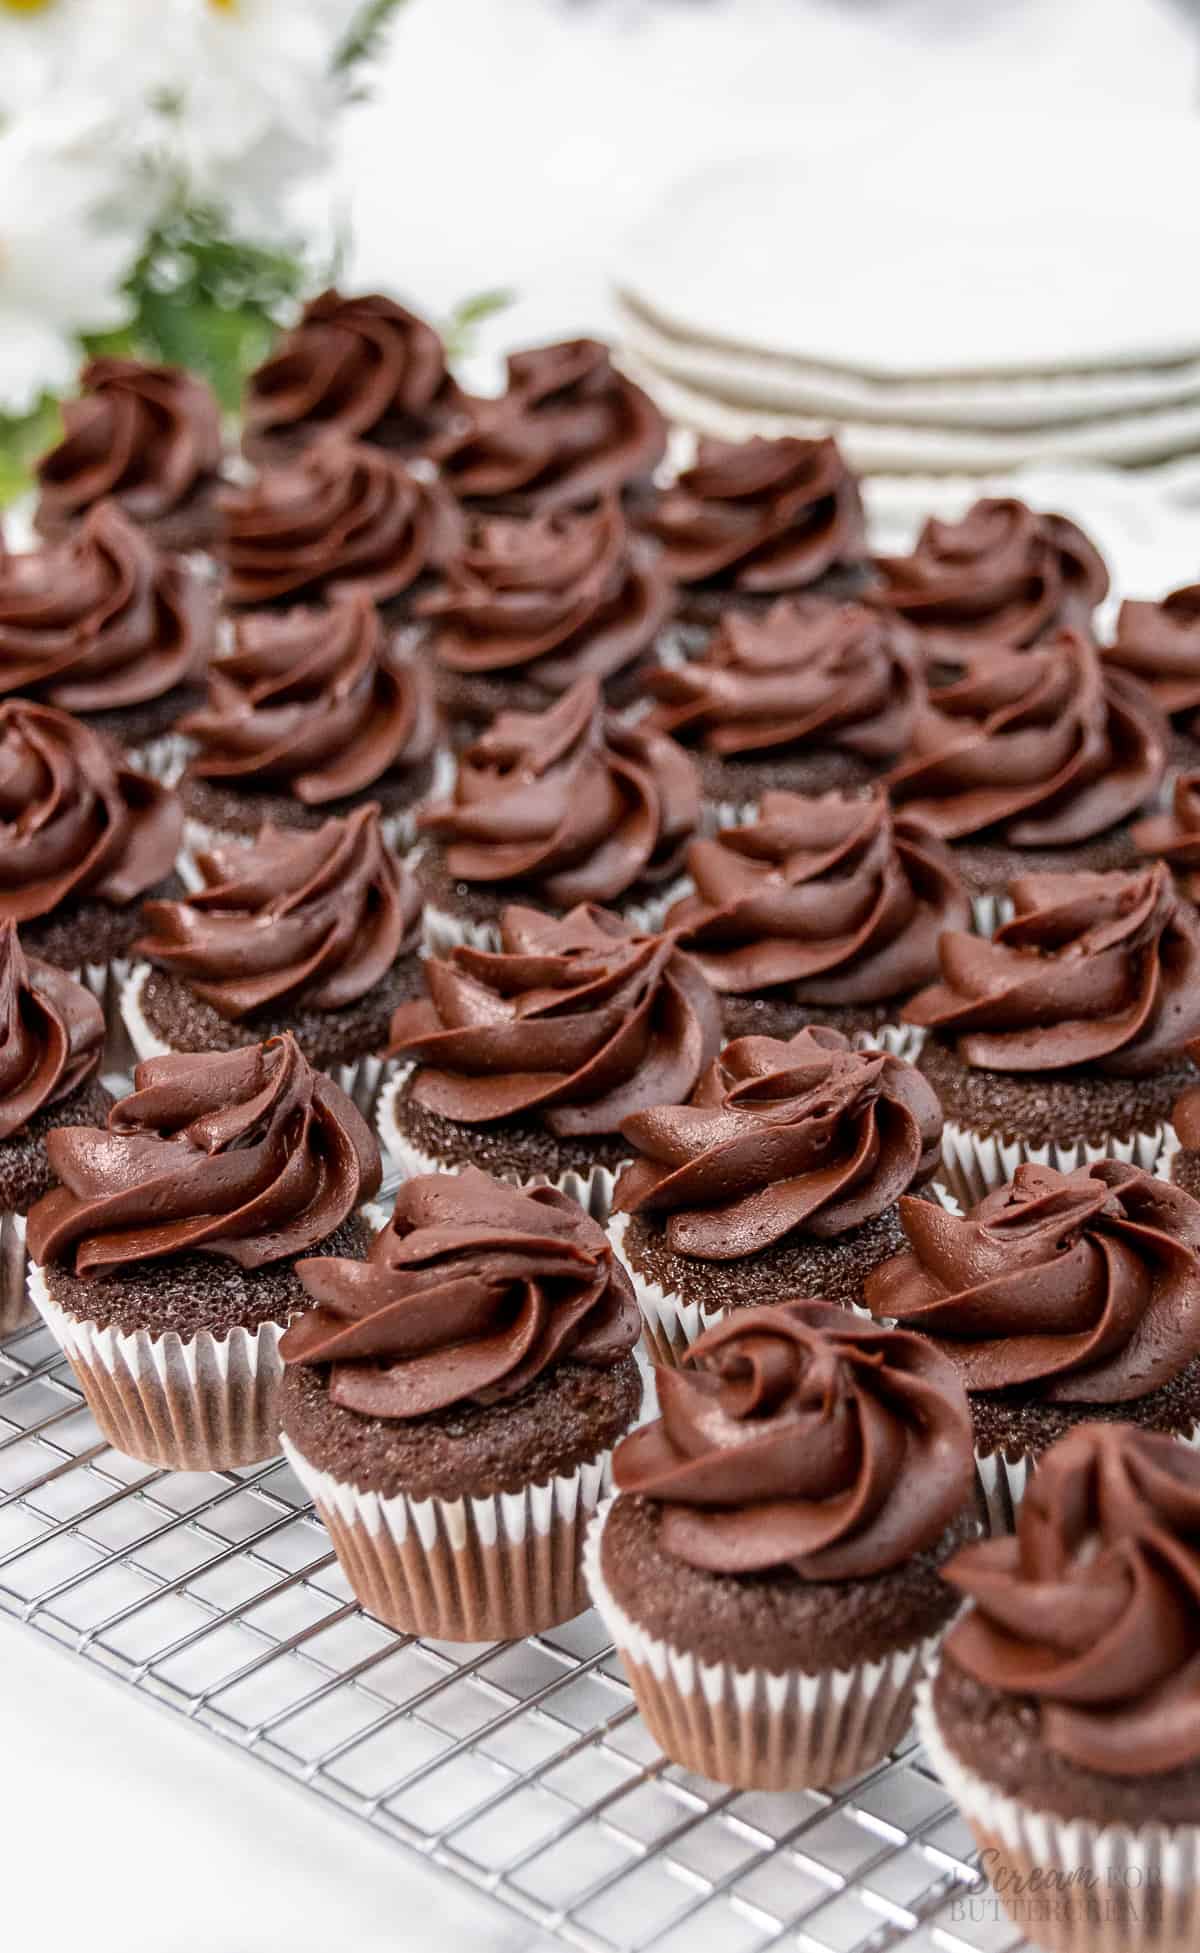 Top view of chocolate mini cupcakes lined up on a cooling rack.